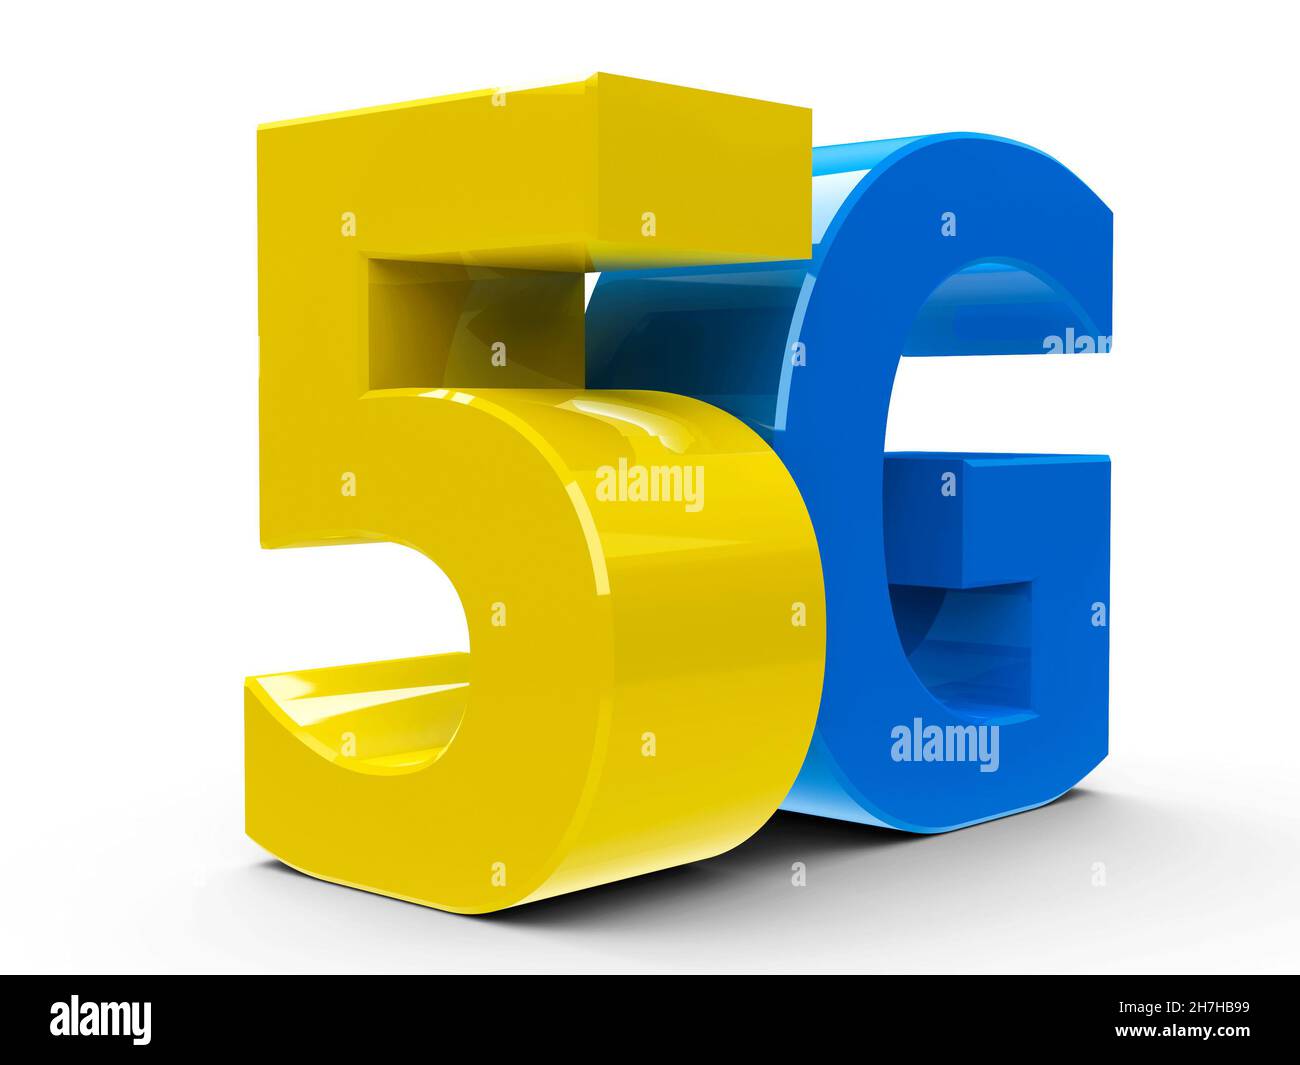 Yellow and blue 5g symbol, icon or button isolated on white background, three-dimensional rendering, 3D illustration Stock Photo